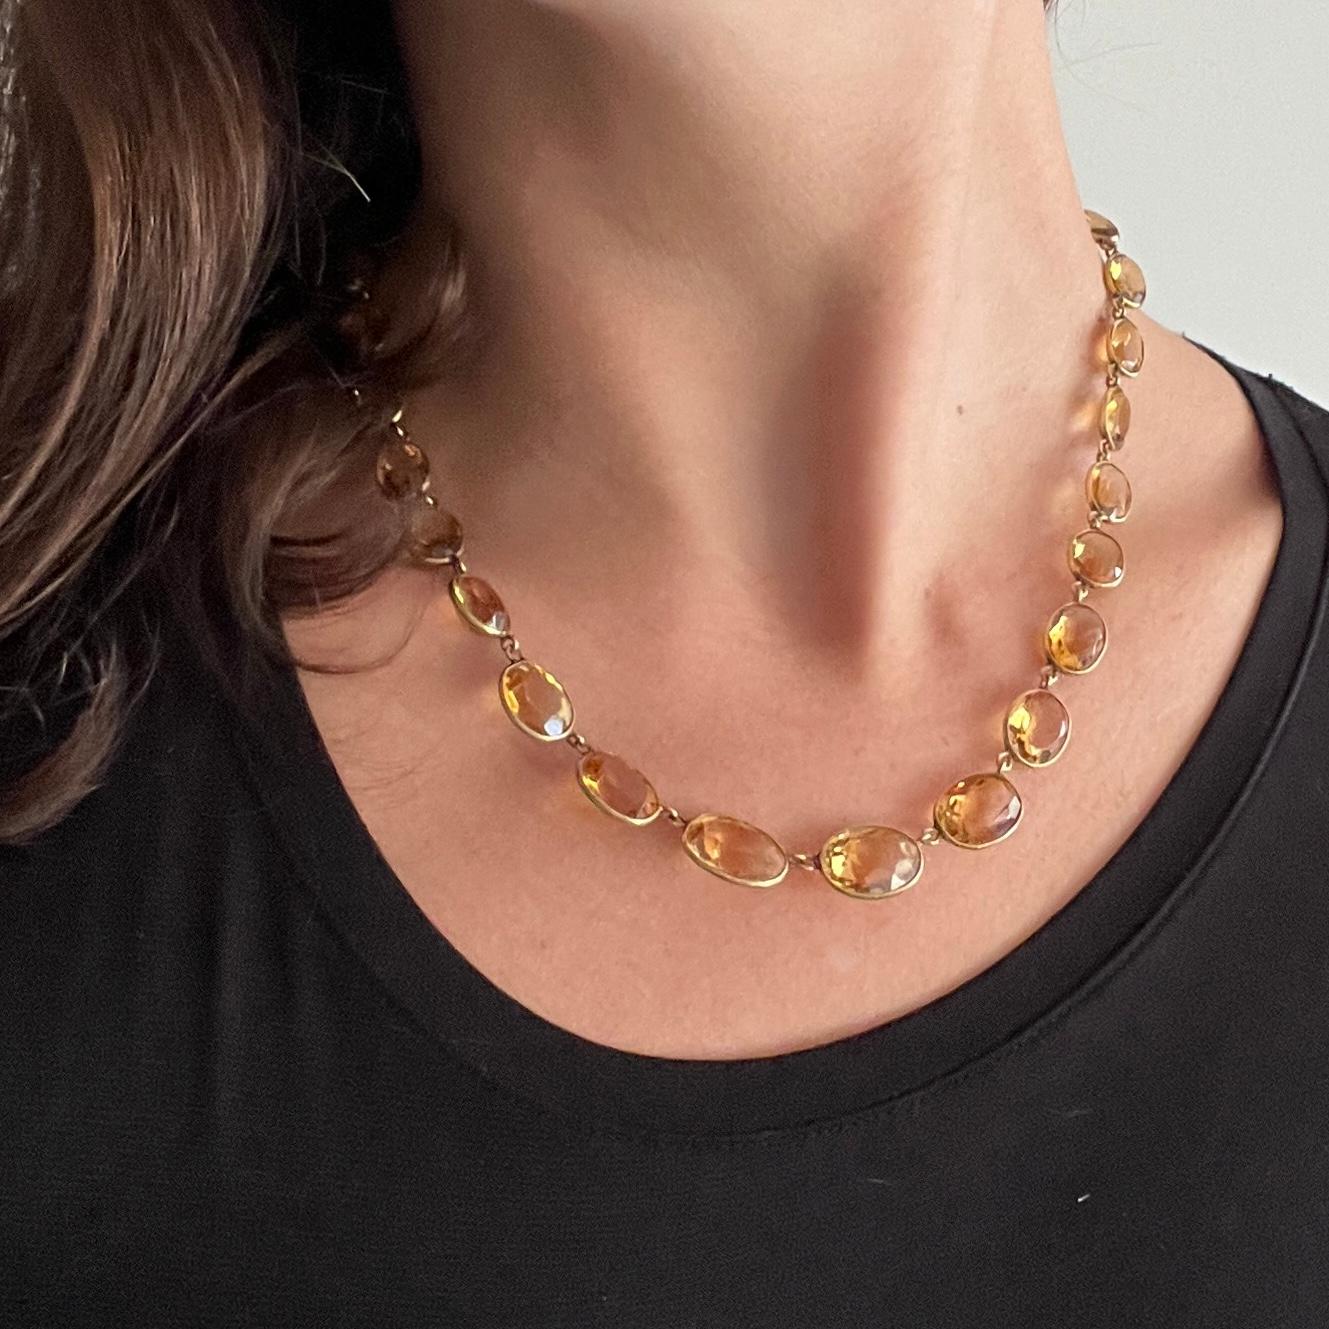 This gorgeous necklace holds 29 stones all set in simple settings. The stones start with larger at the centre and get smaller towards the clasp. modelled in 9carat gold. 

Length:44.5cm
Stone Dimensions: 10x14mm - 7x9mm

Weight: 21.6g 